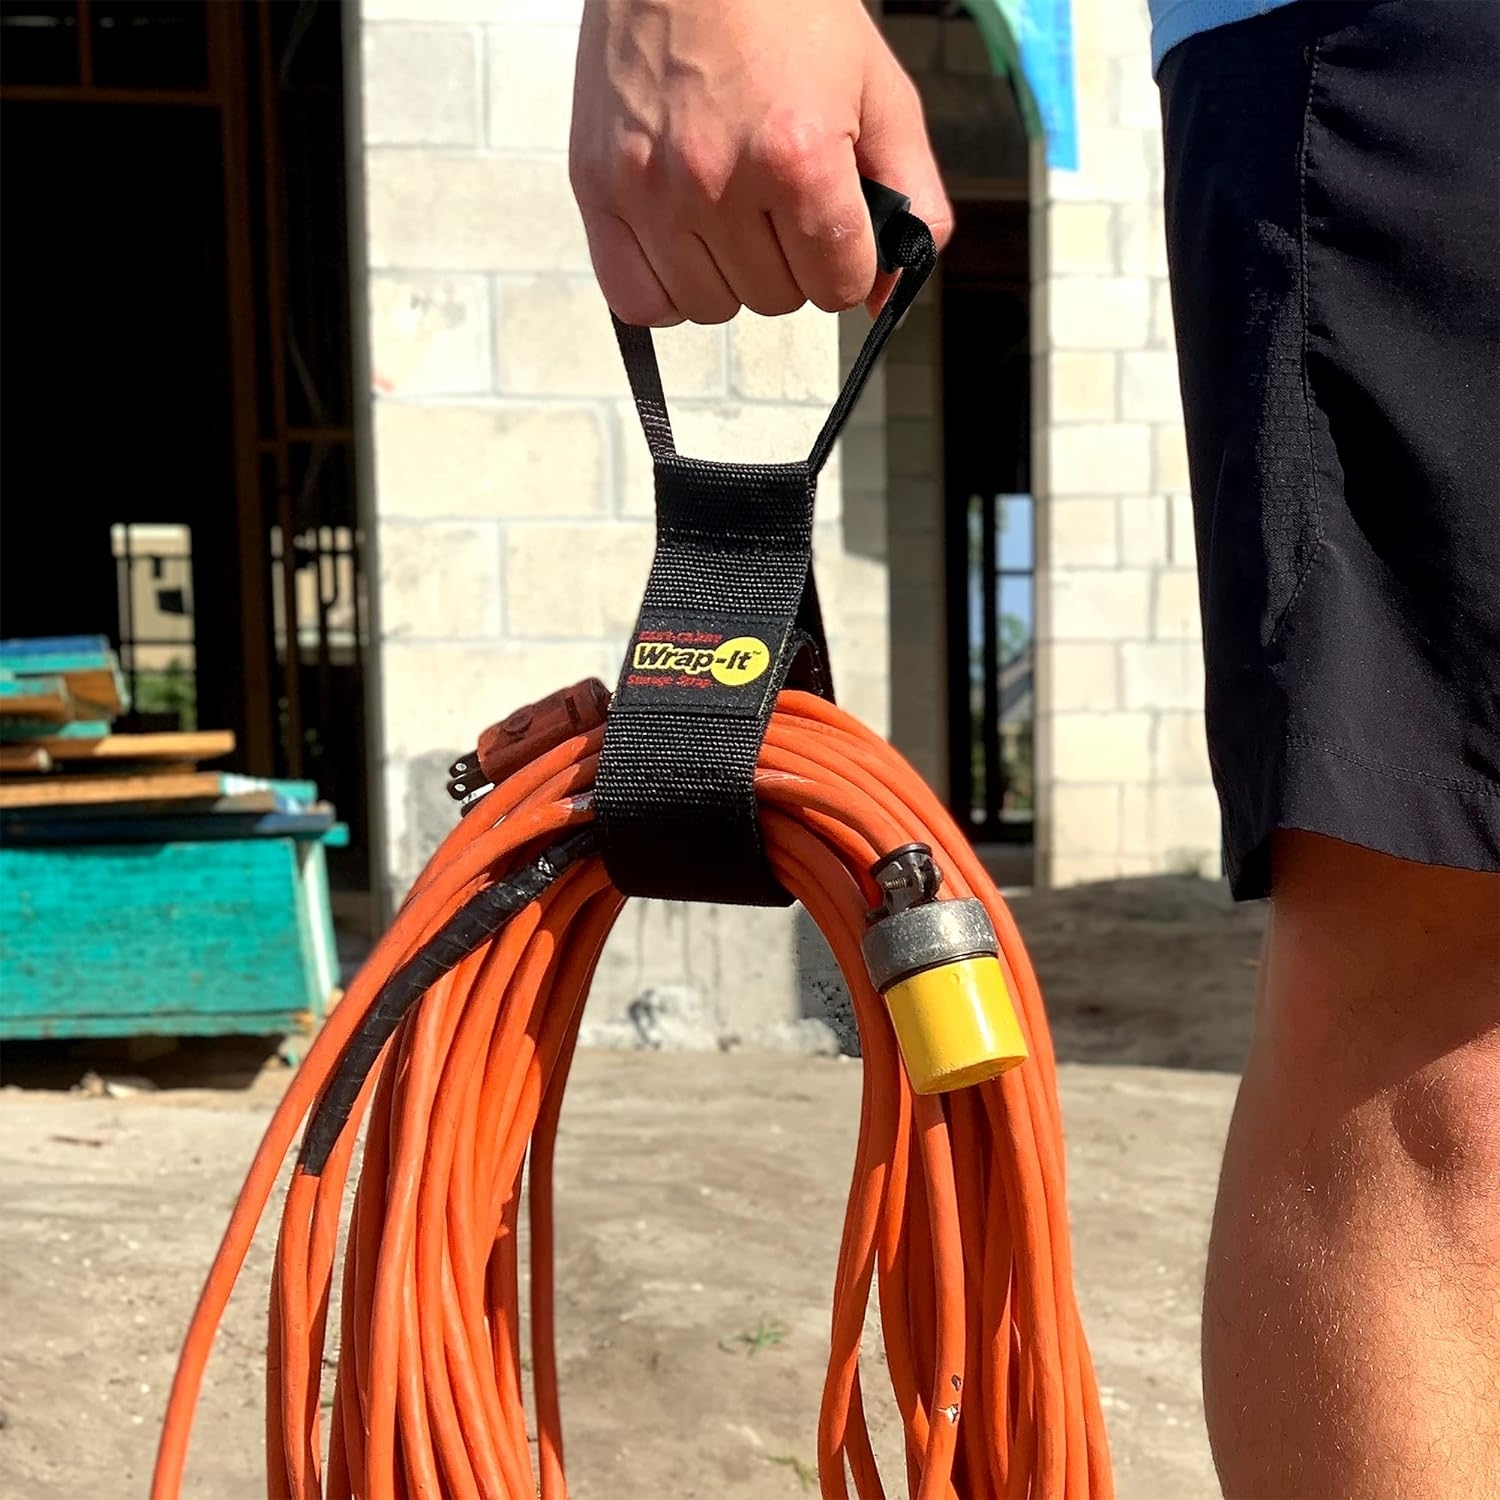 person carrying hose with the strap attached